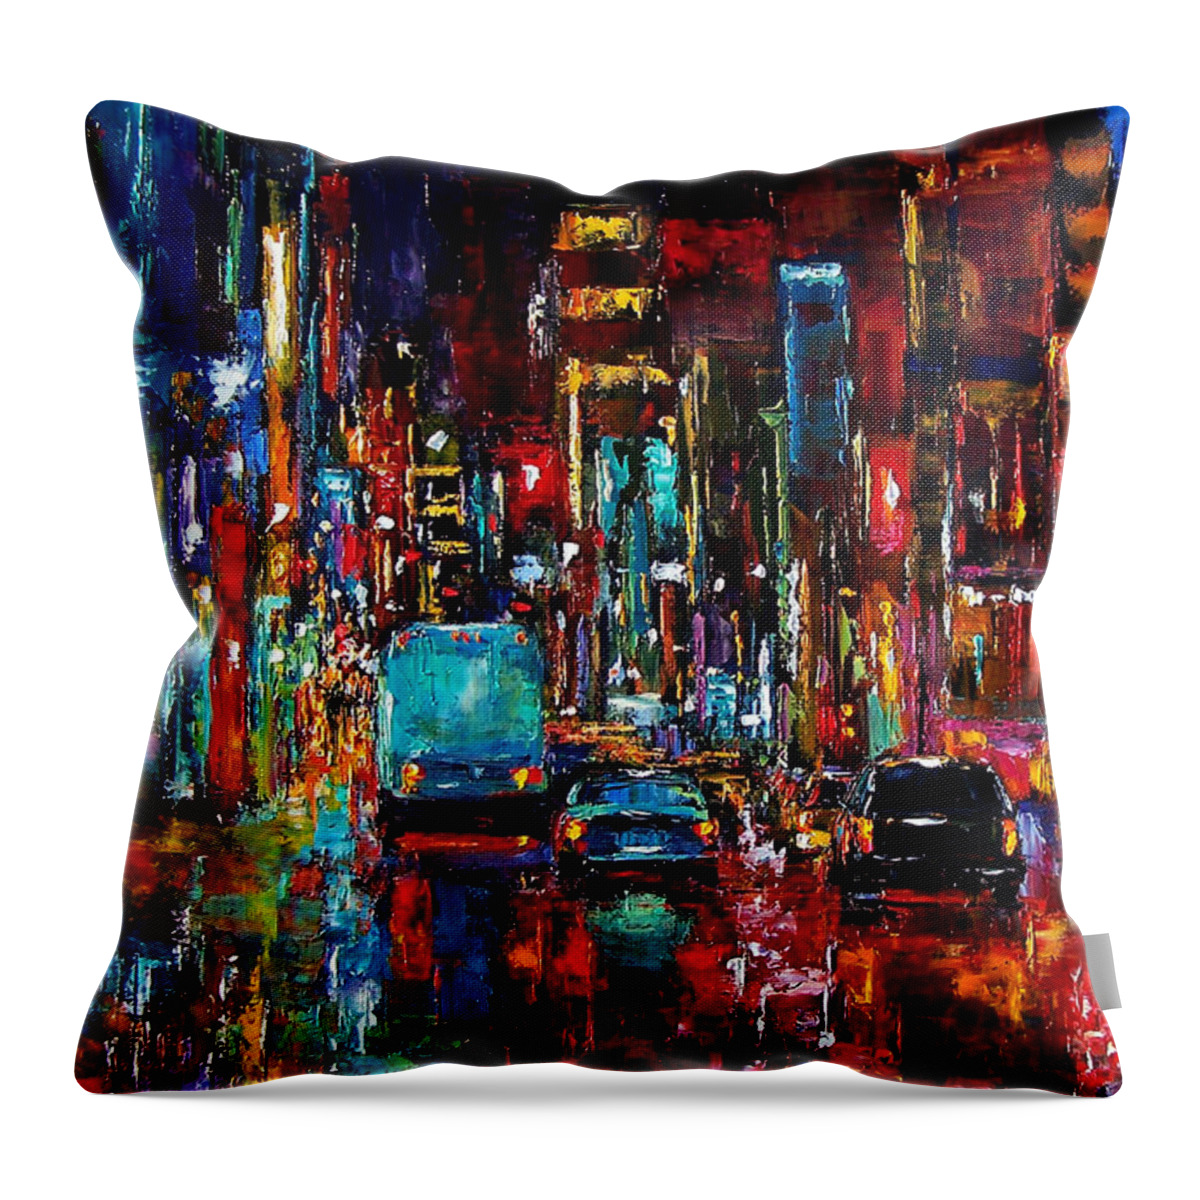 Cityscape Throw Pillow featuring the painting Party Of Lights by Debra Hurd